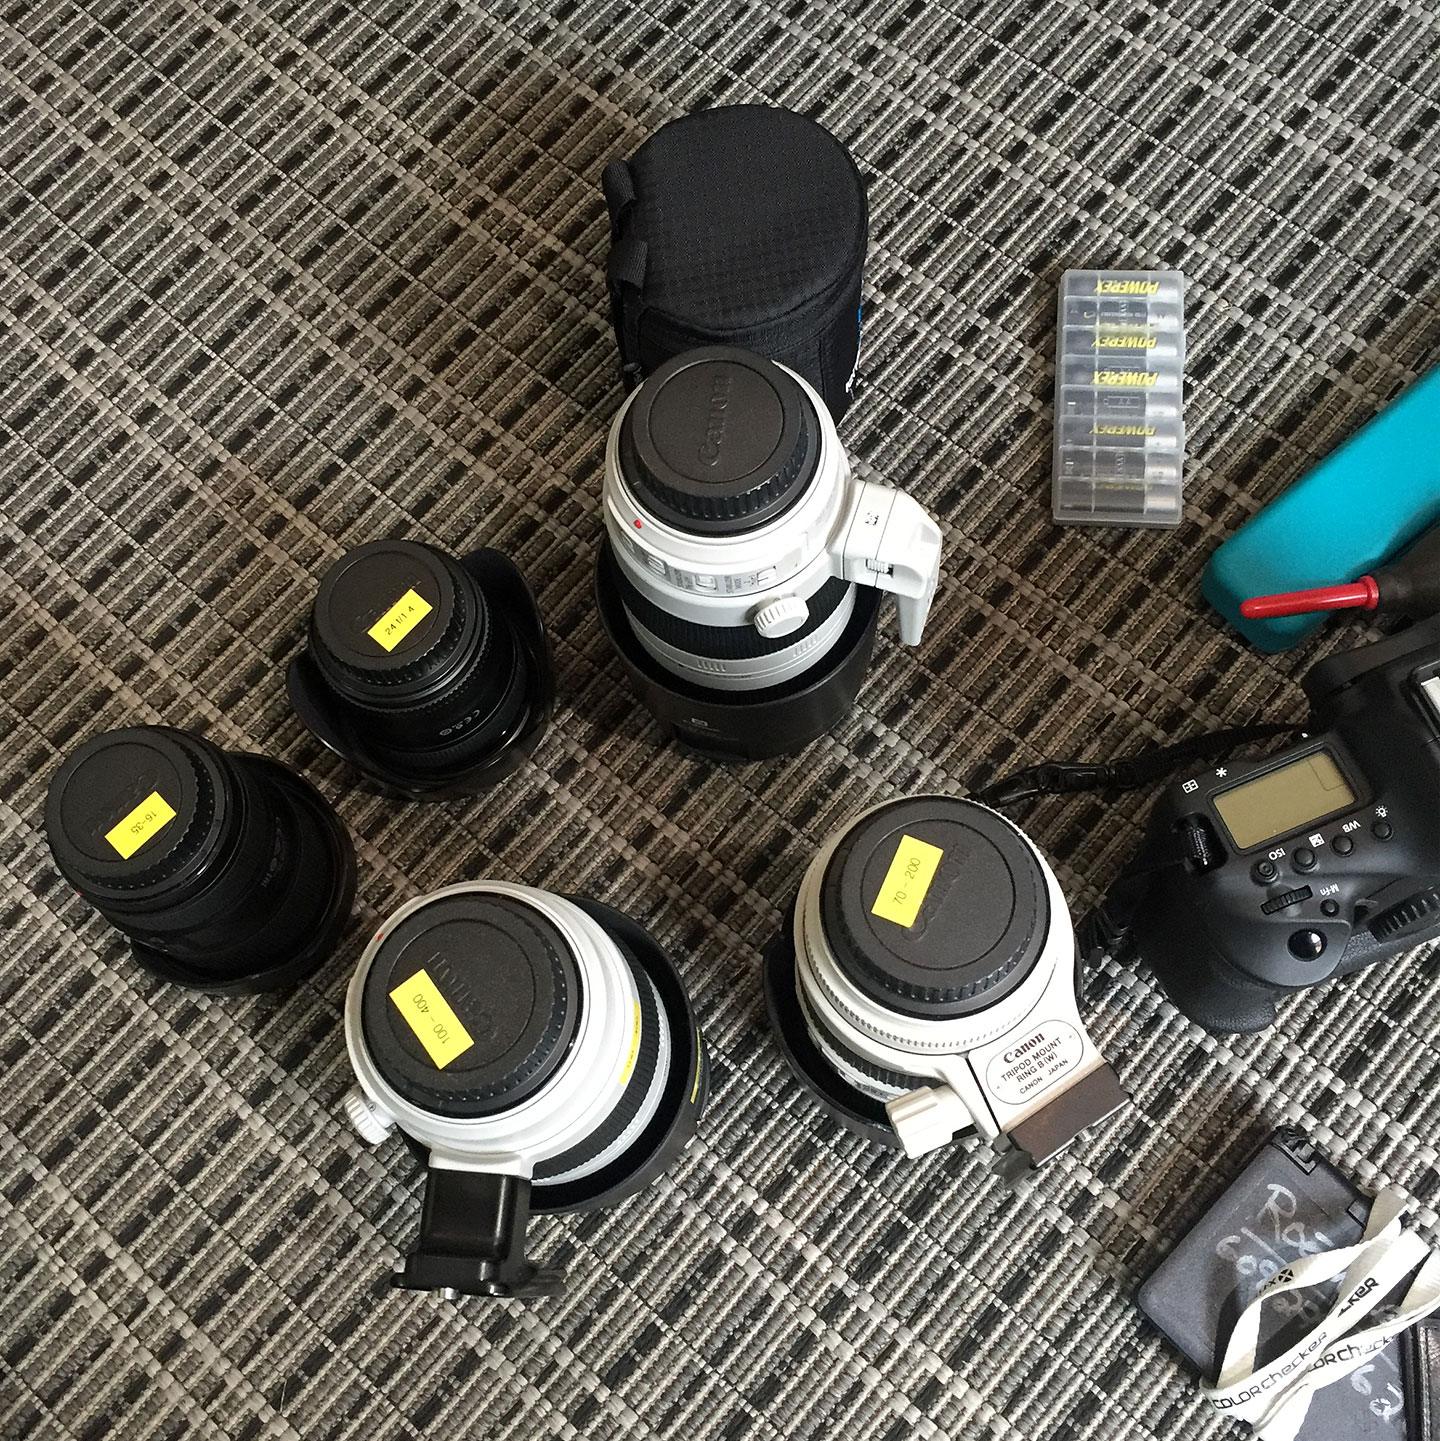 Packing for the Notorious RBG project. Two Canon 100-400 f/4.5-5.6L II lenses, a 70-200 f/2.8L II, 16-35 f/4L, and a 24 f/1.4L II lens. Canon 1DX Mark II and assorted bits. Princeton, NJ. September 20, 2016.